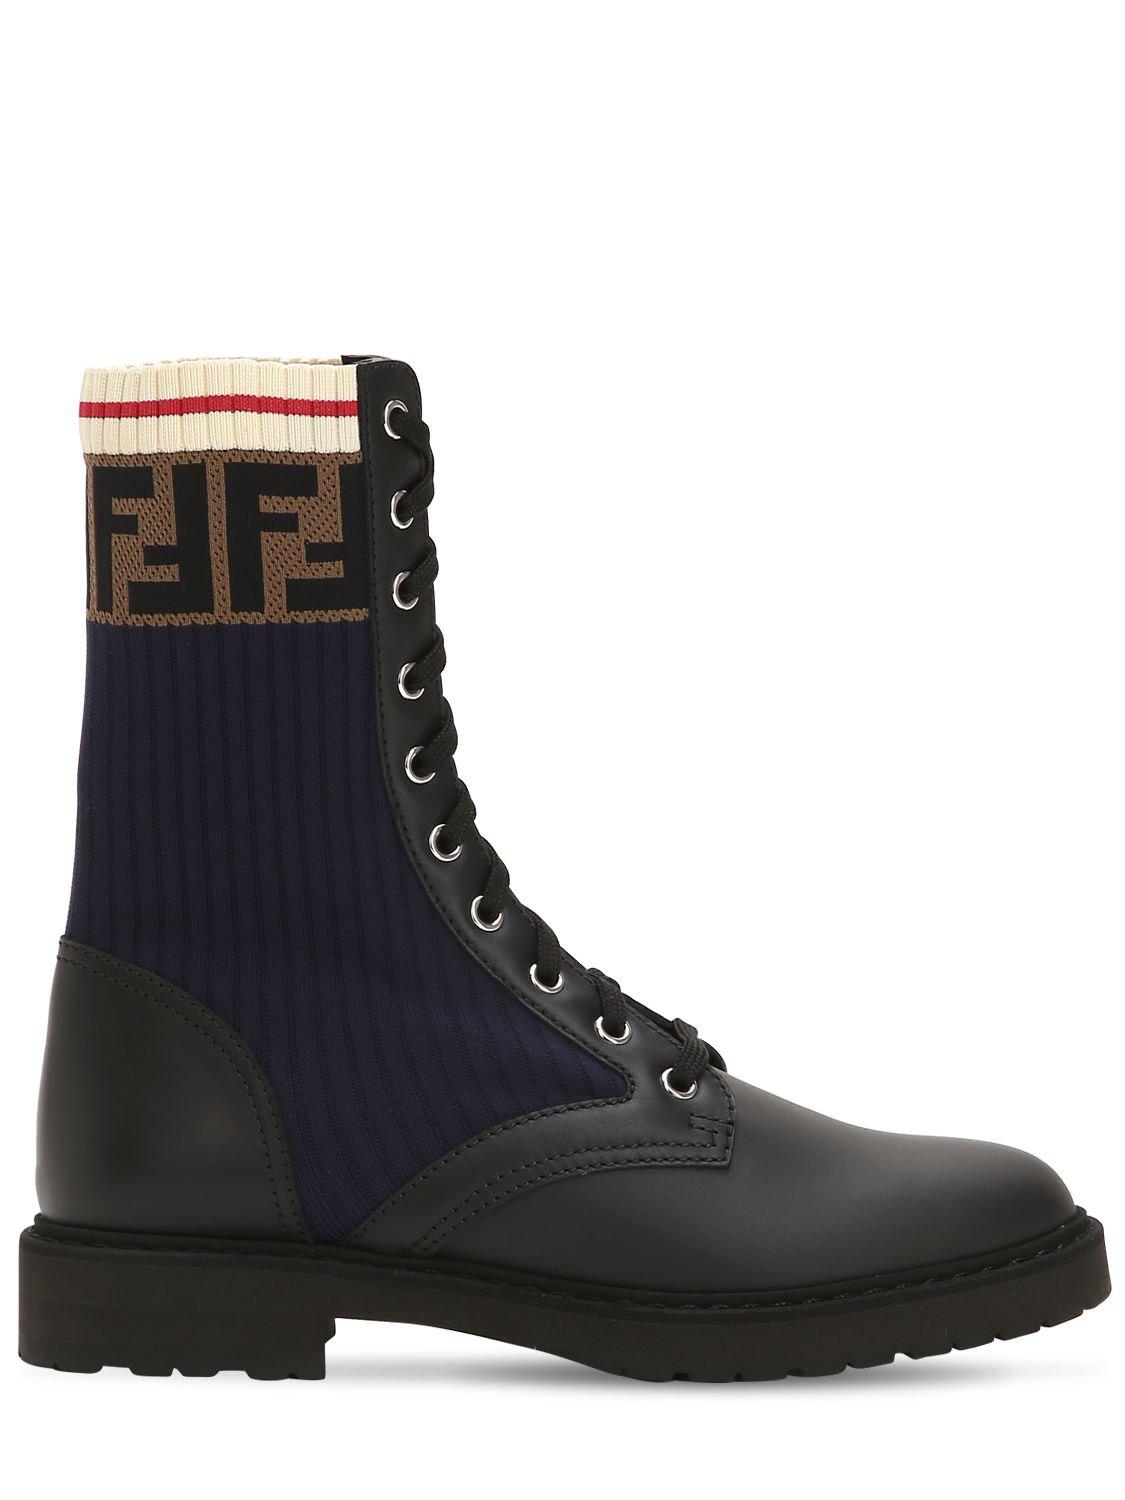 Fendi 20mm Leather & Knit Combat Boots in Blue - Lyst